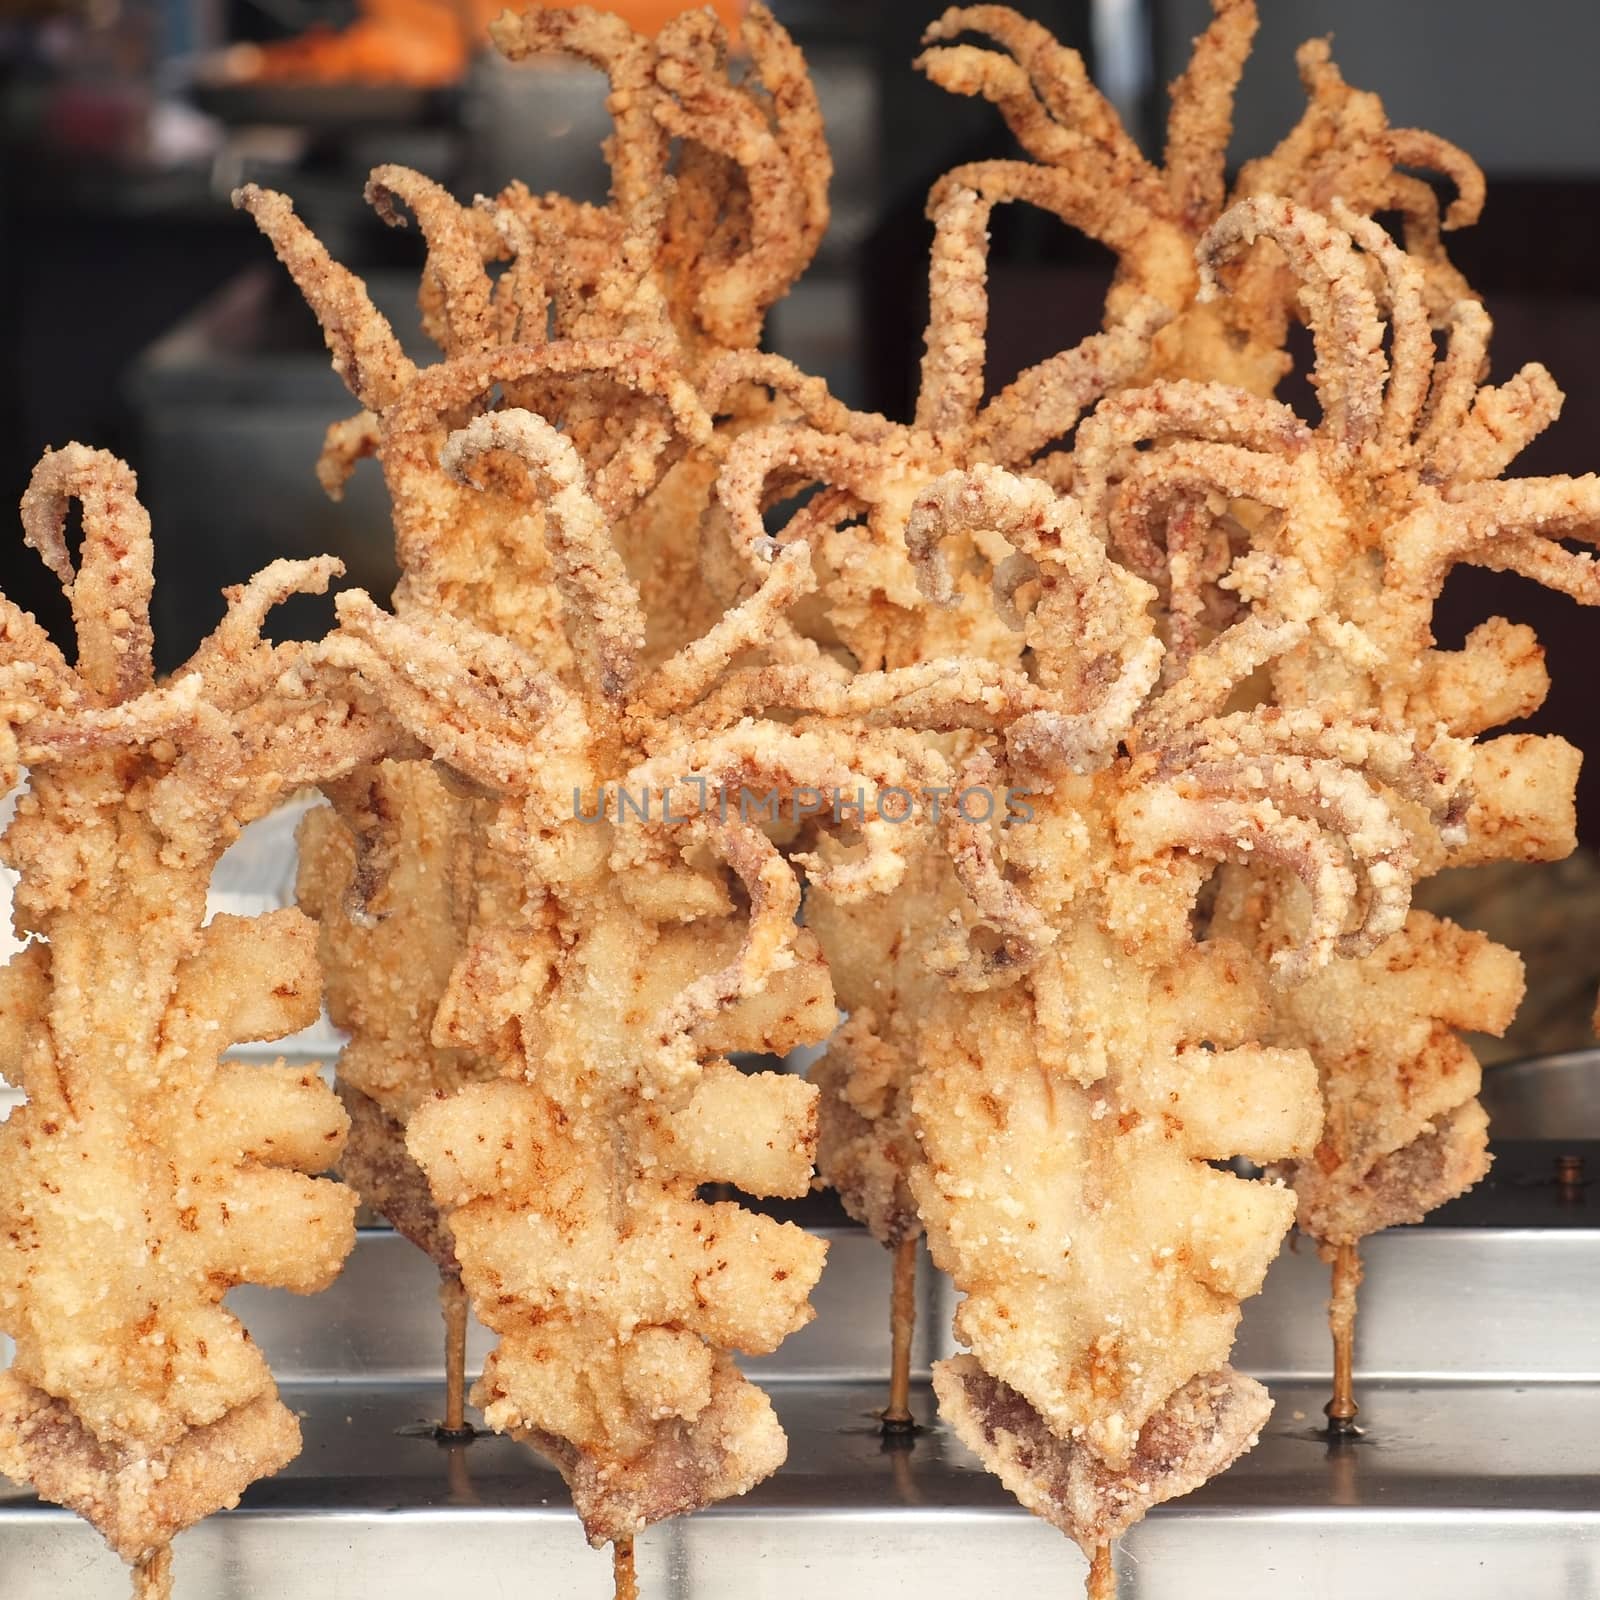 Deep fried octopus on skewers for sale at an outdoor stall
